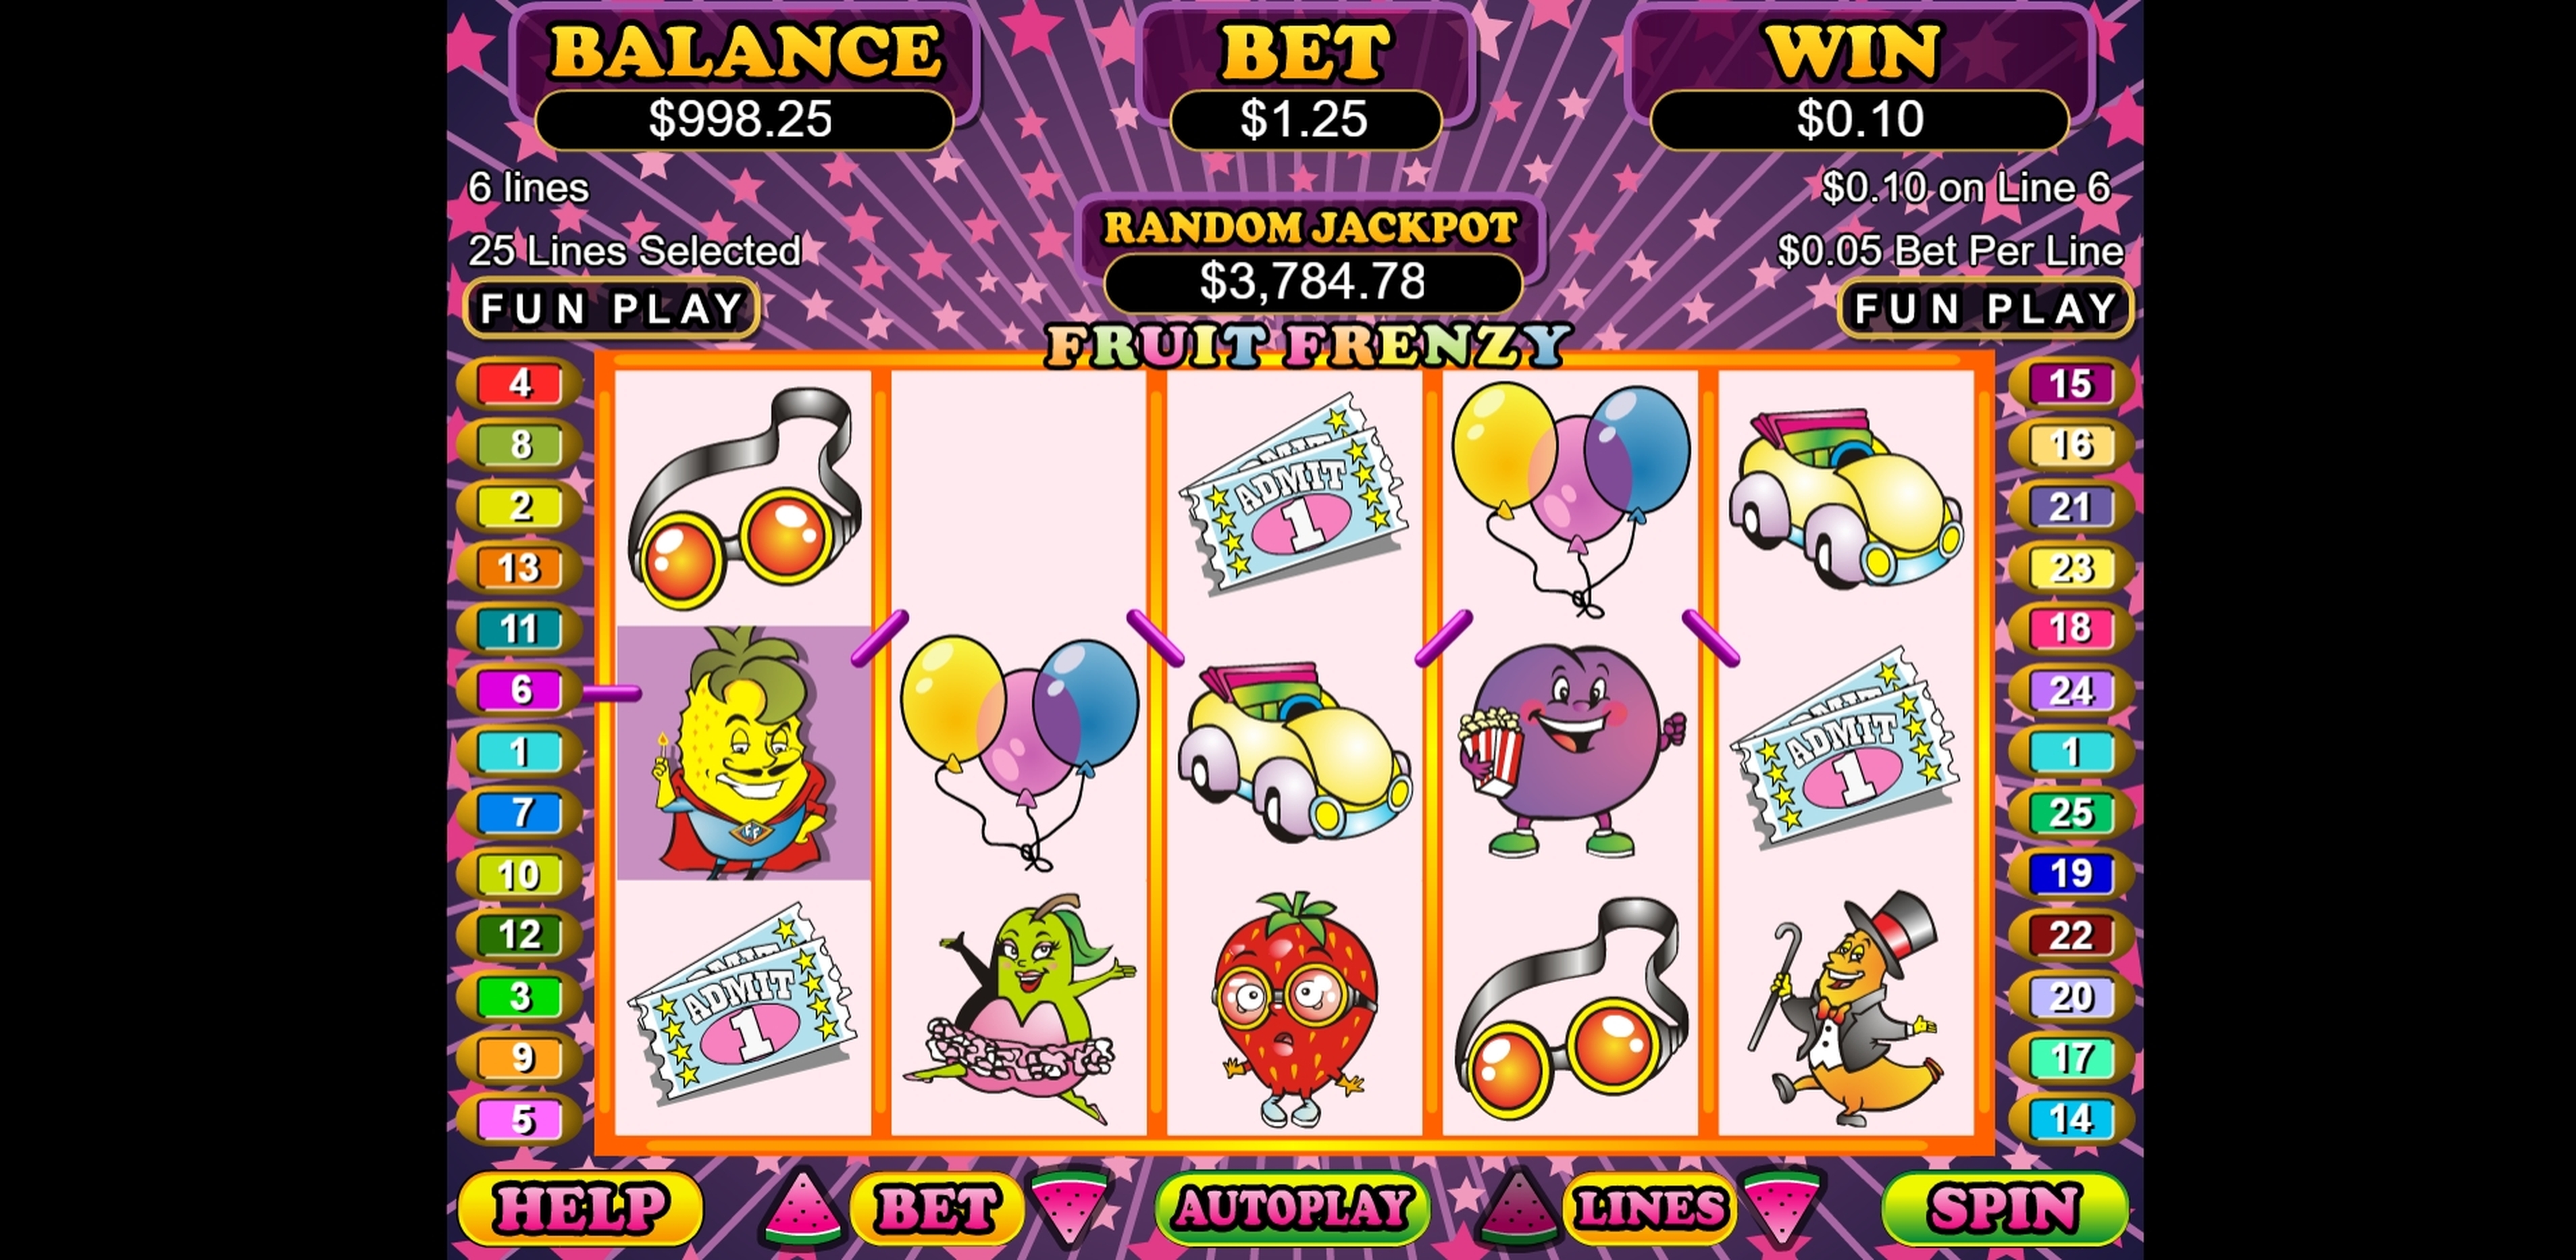 Win Money in Fruit Frenzy Free Slot Game by Real Time Gaming